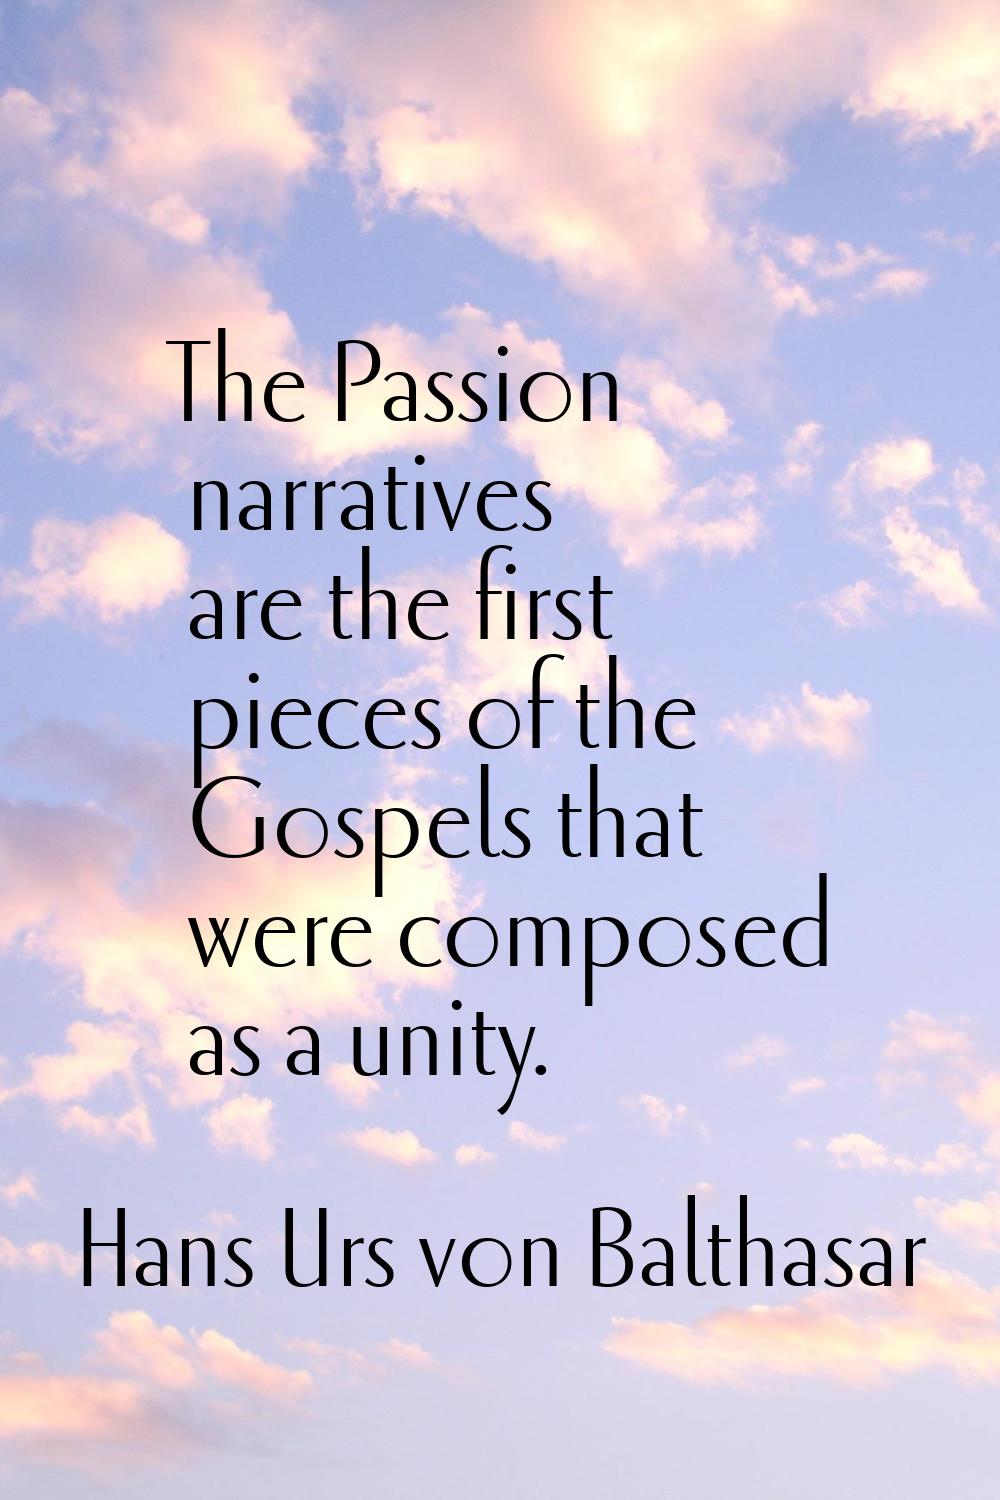 The Passion narratives are the first pieces of the Gospels that were composed as a unity.